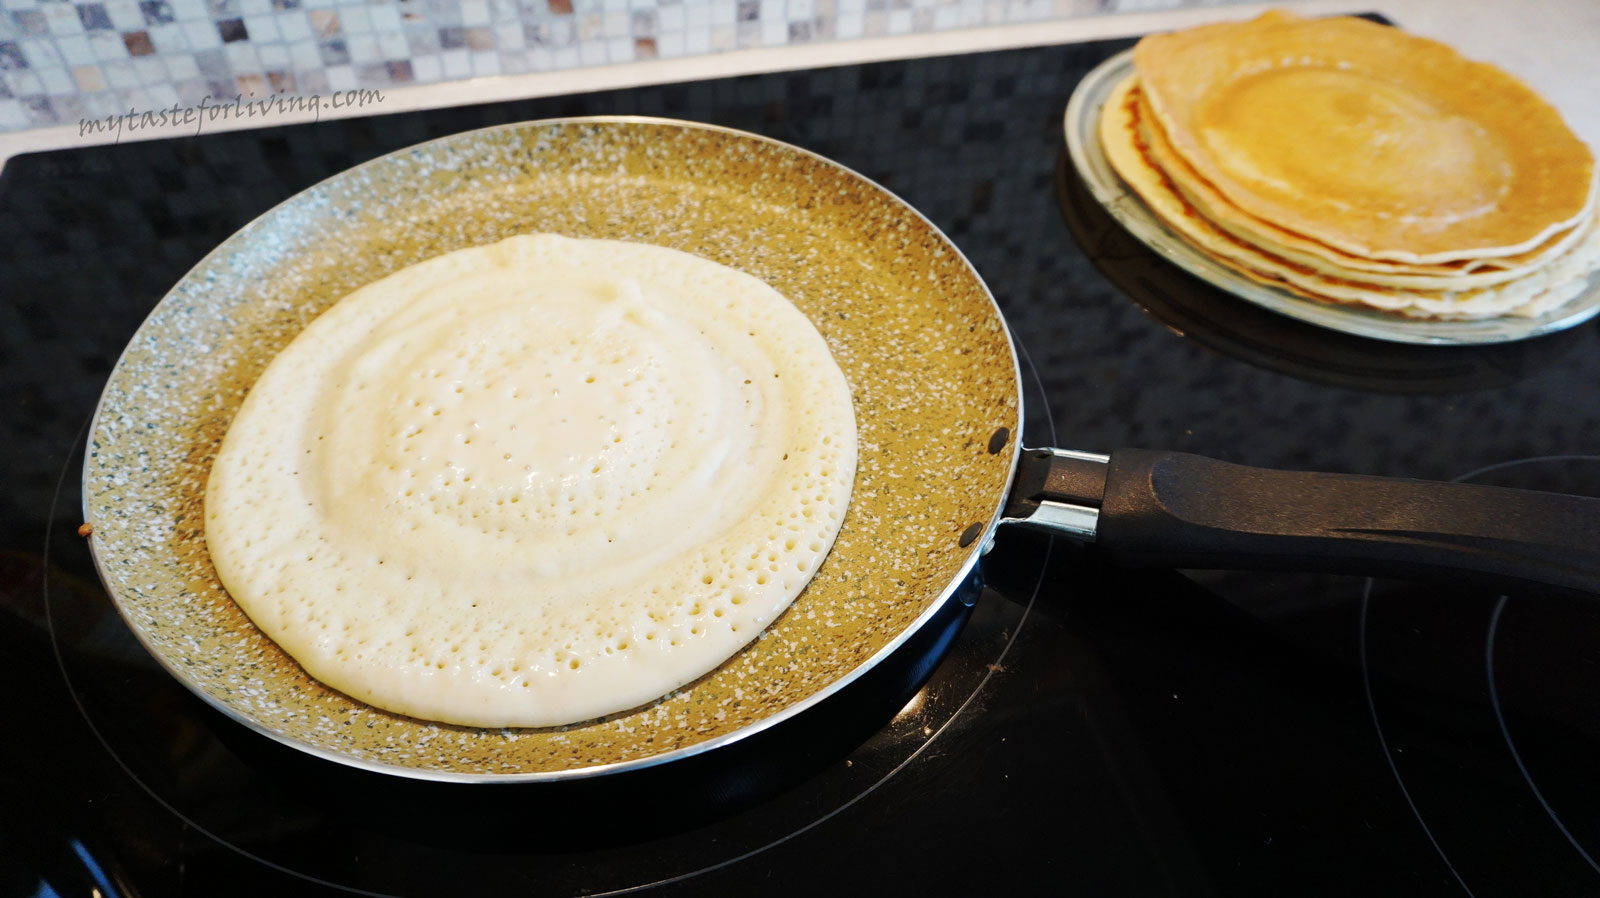 In the Internet space there are many recipes for pancakes. I've tried to make different options until I finally make my own, which I do regularly and the kids really like them.